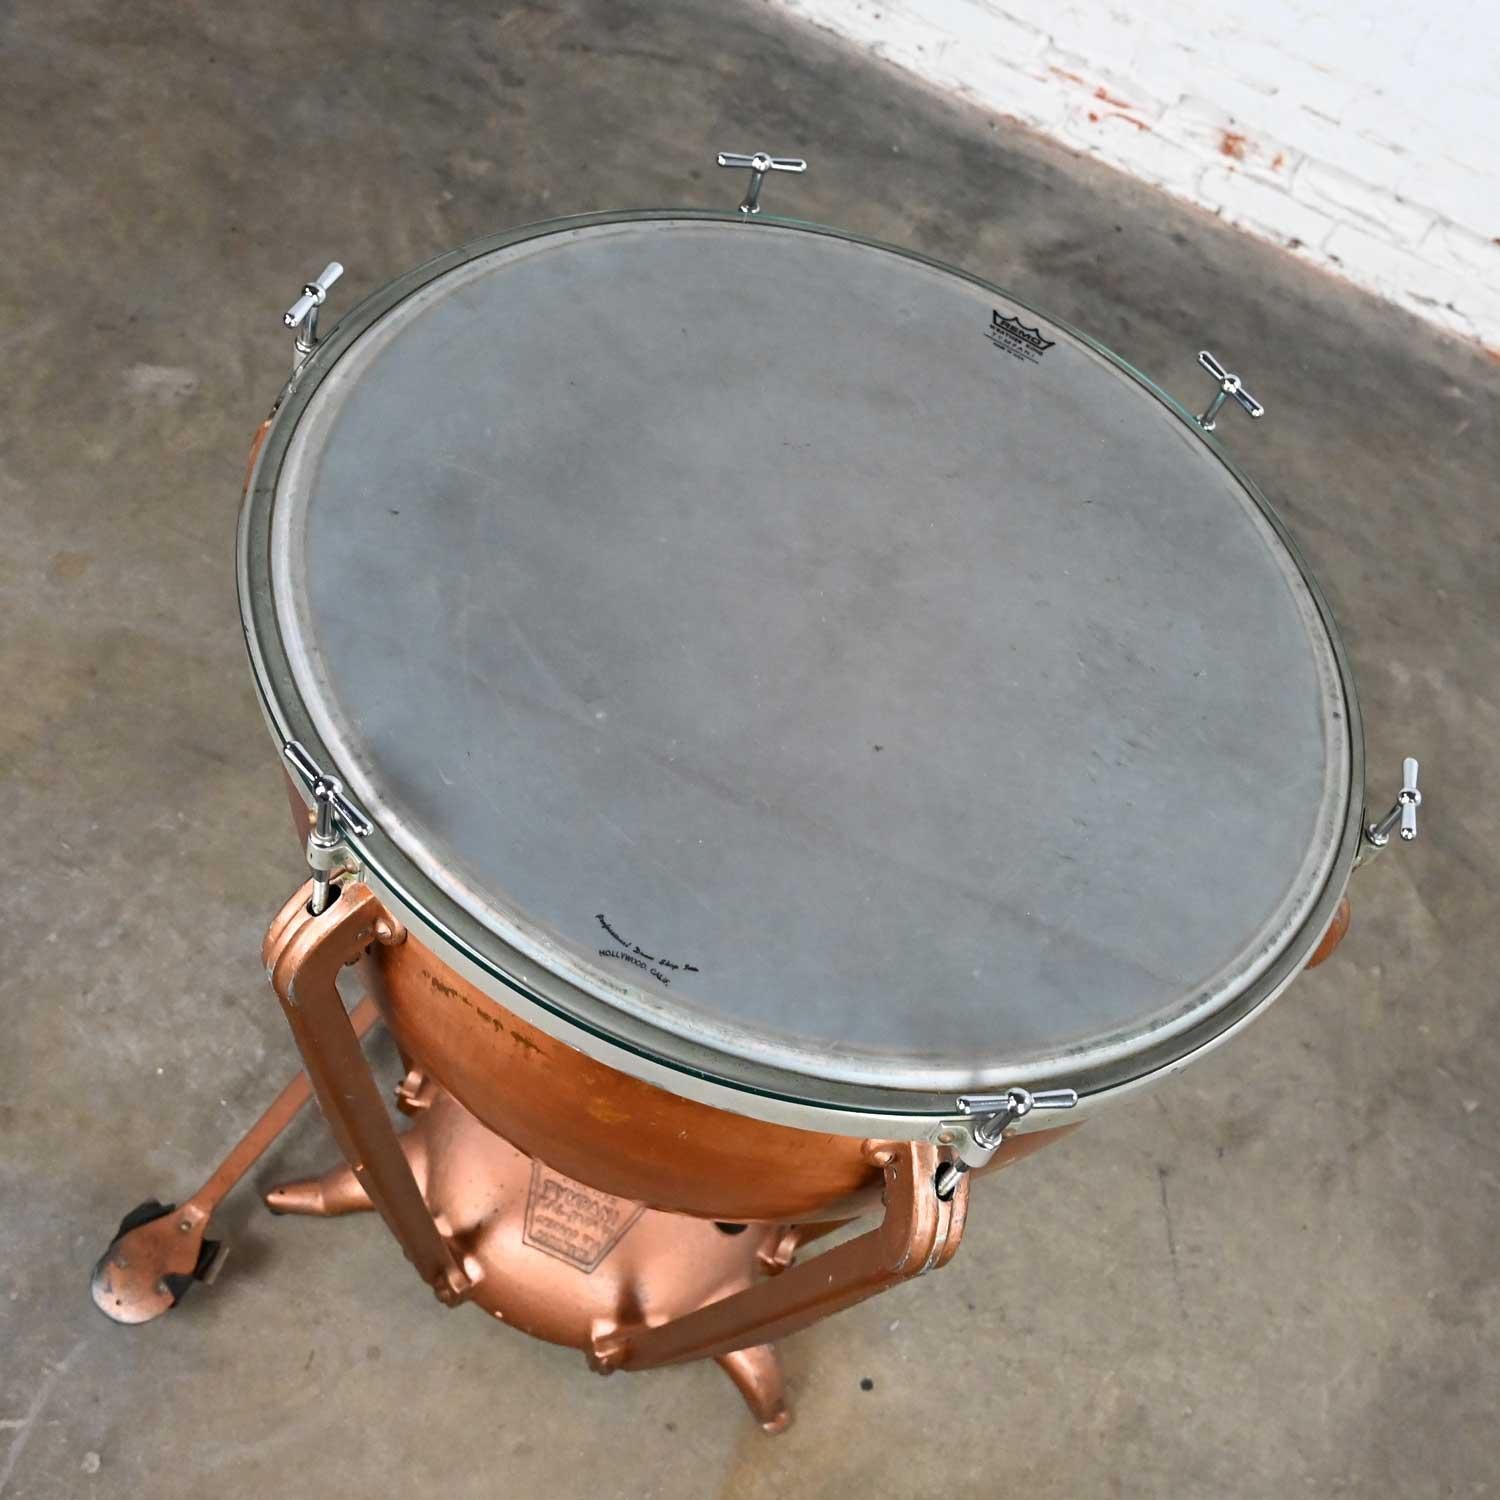 kettle drums for sale